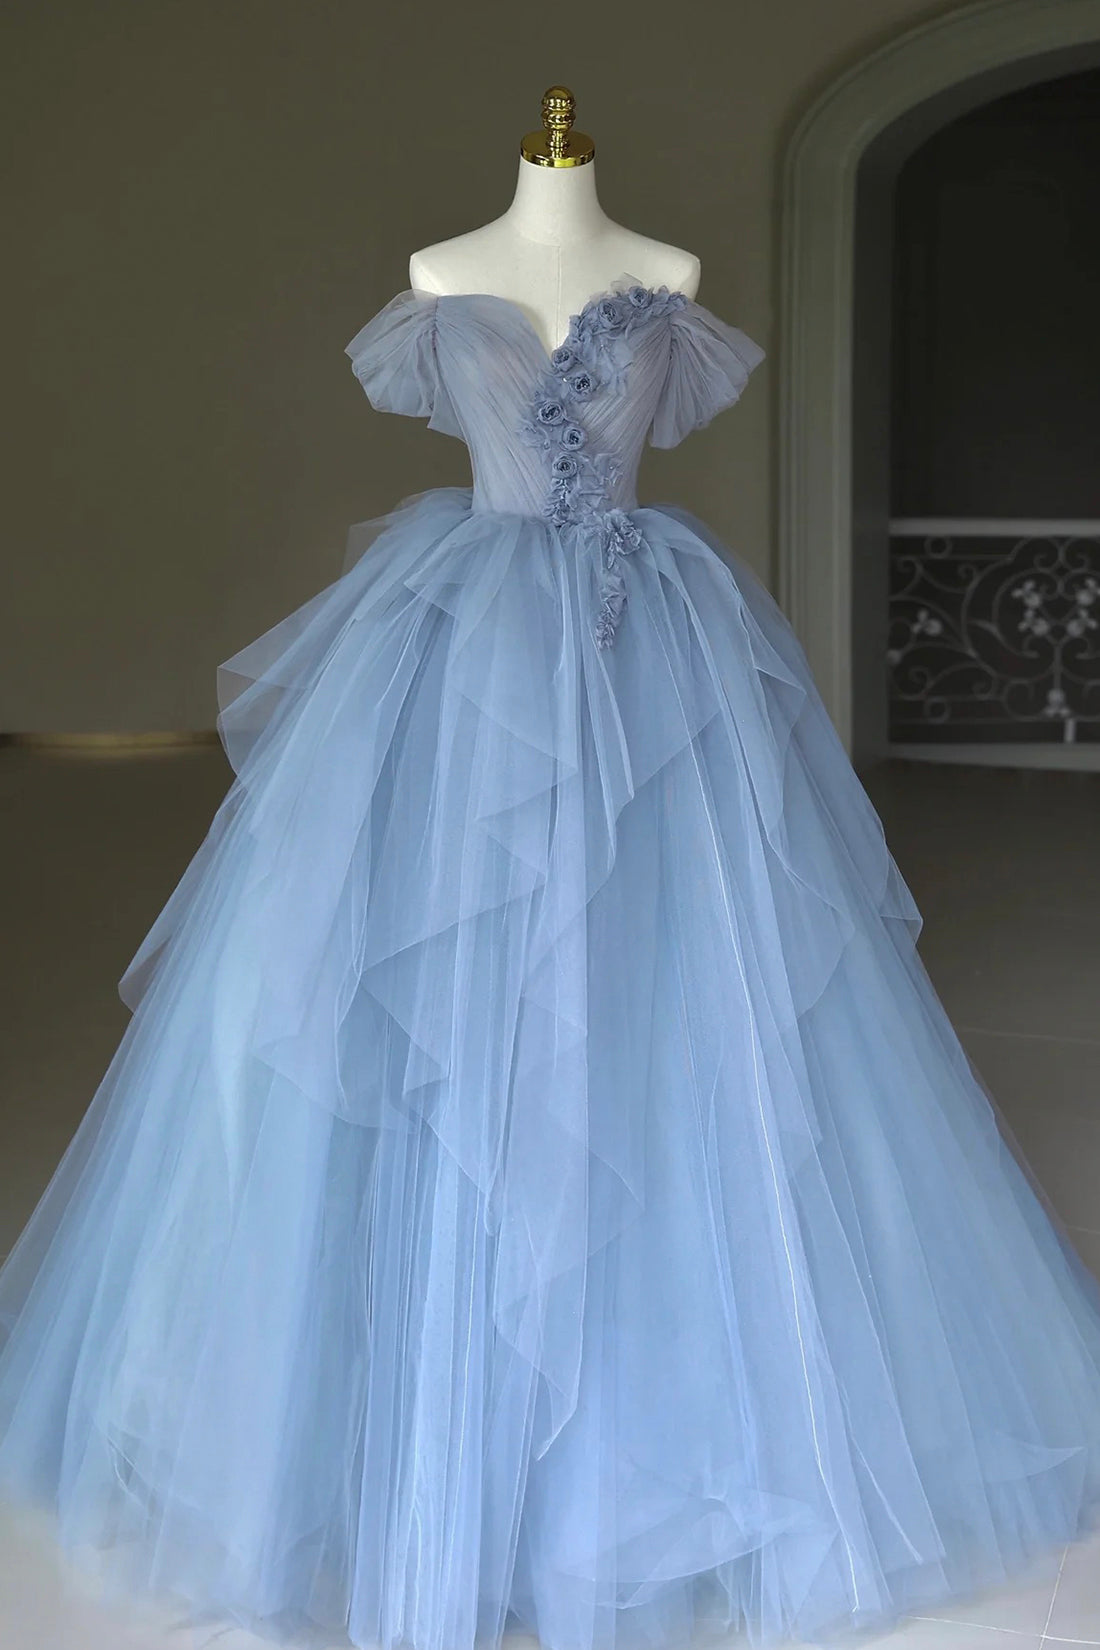 Blue Tulle Floor Length Prom Dress Outfits For Girls, Off the Shoulder Evening Dress Outfits For Women with 3D Flowers